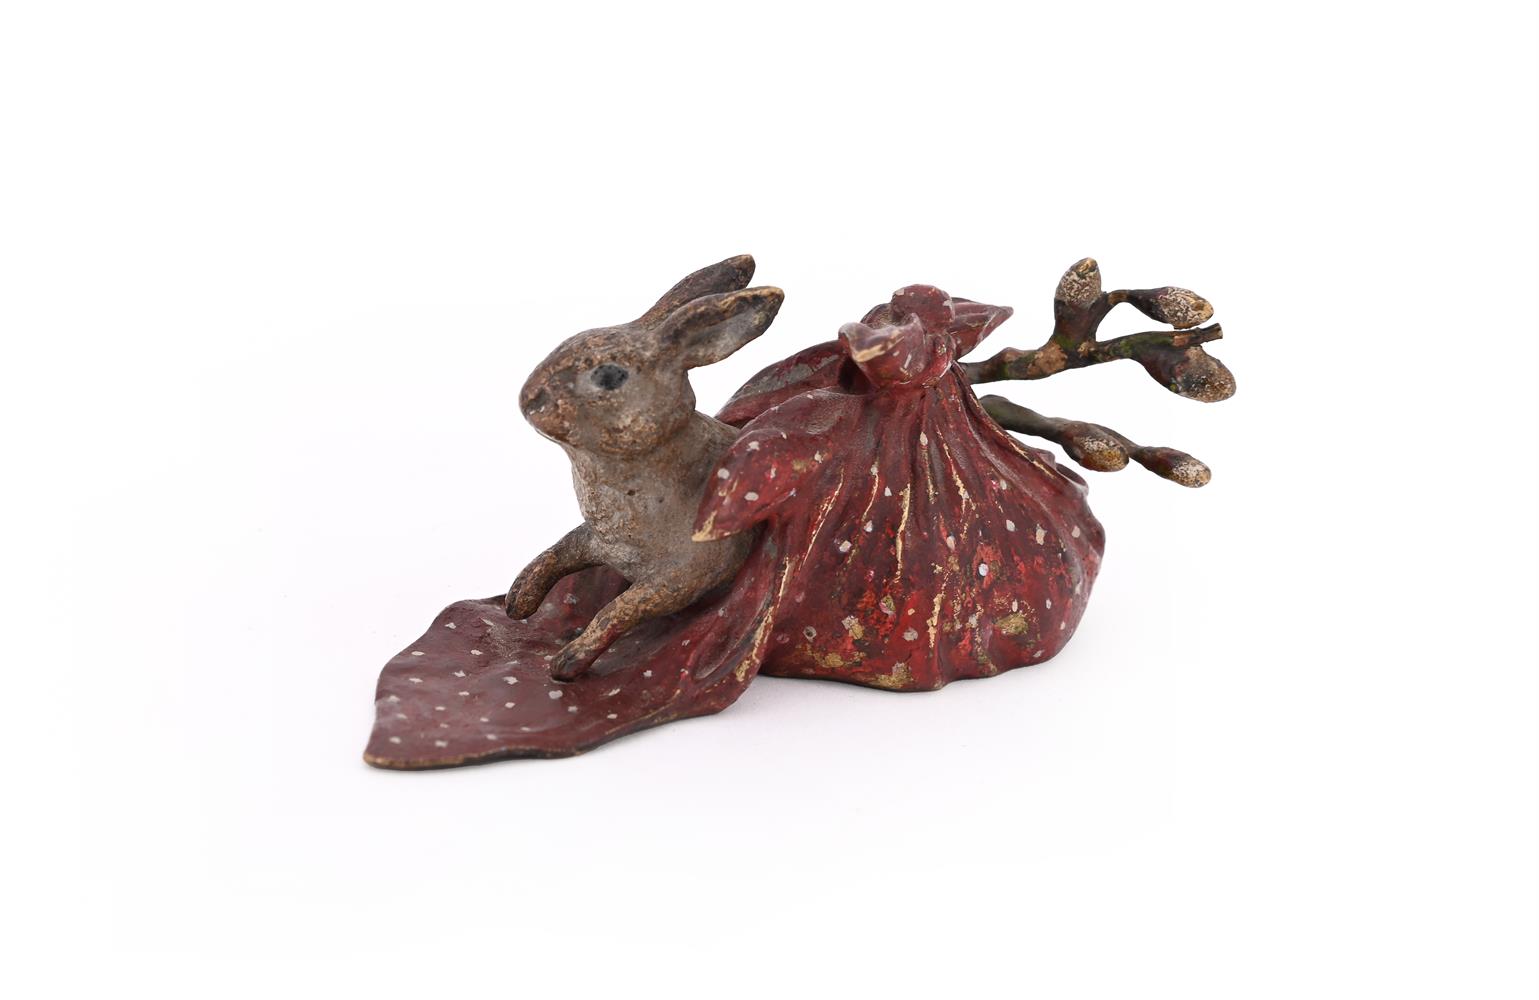 FRANZ XAVIER BERGMAN (1861-1936), A COLD PAINTED MODEL OF A CLOTH WRAPPED RABBIT - Image 2 of 3